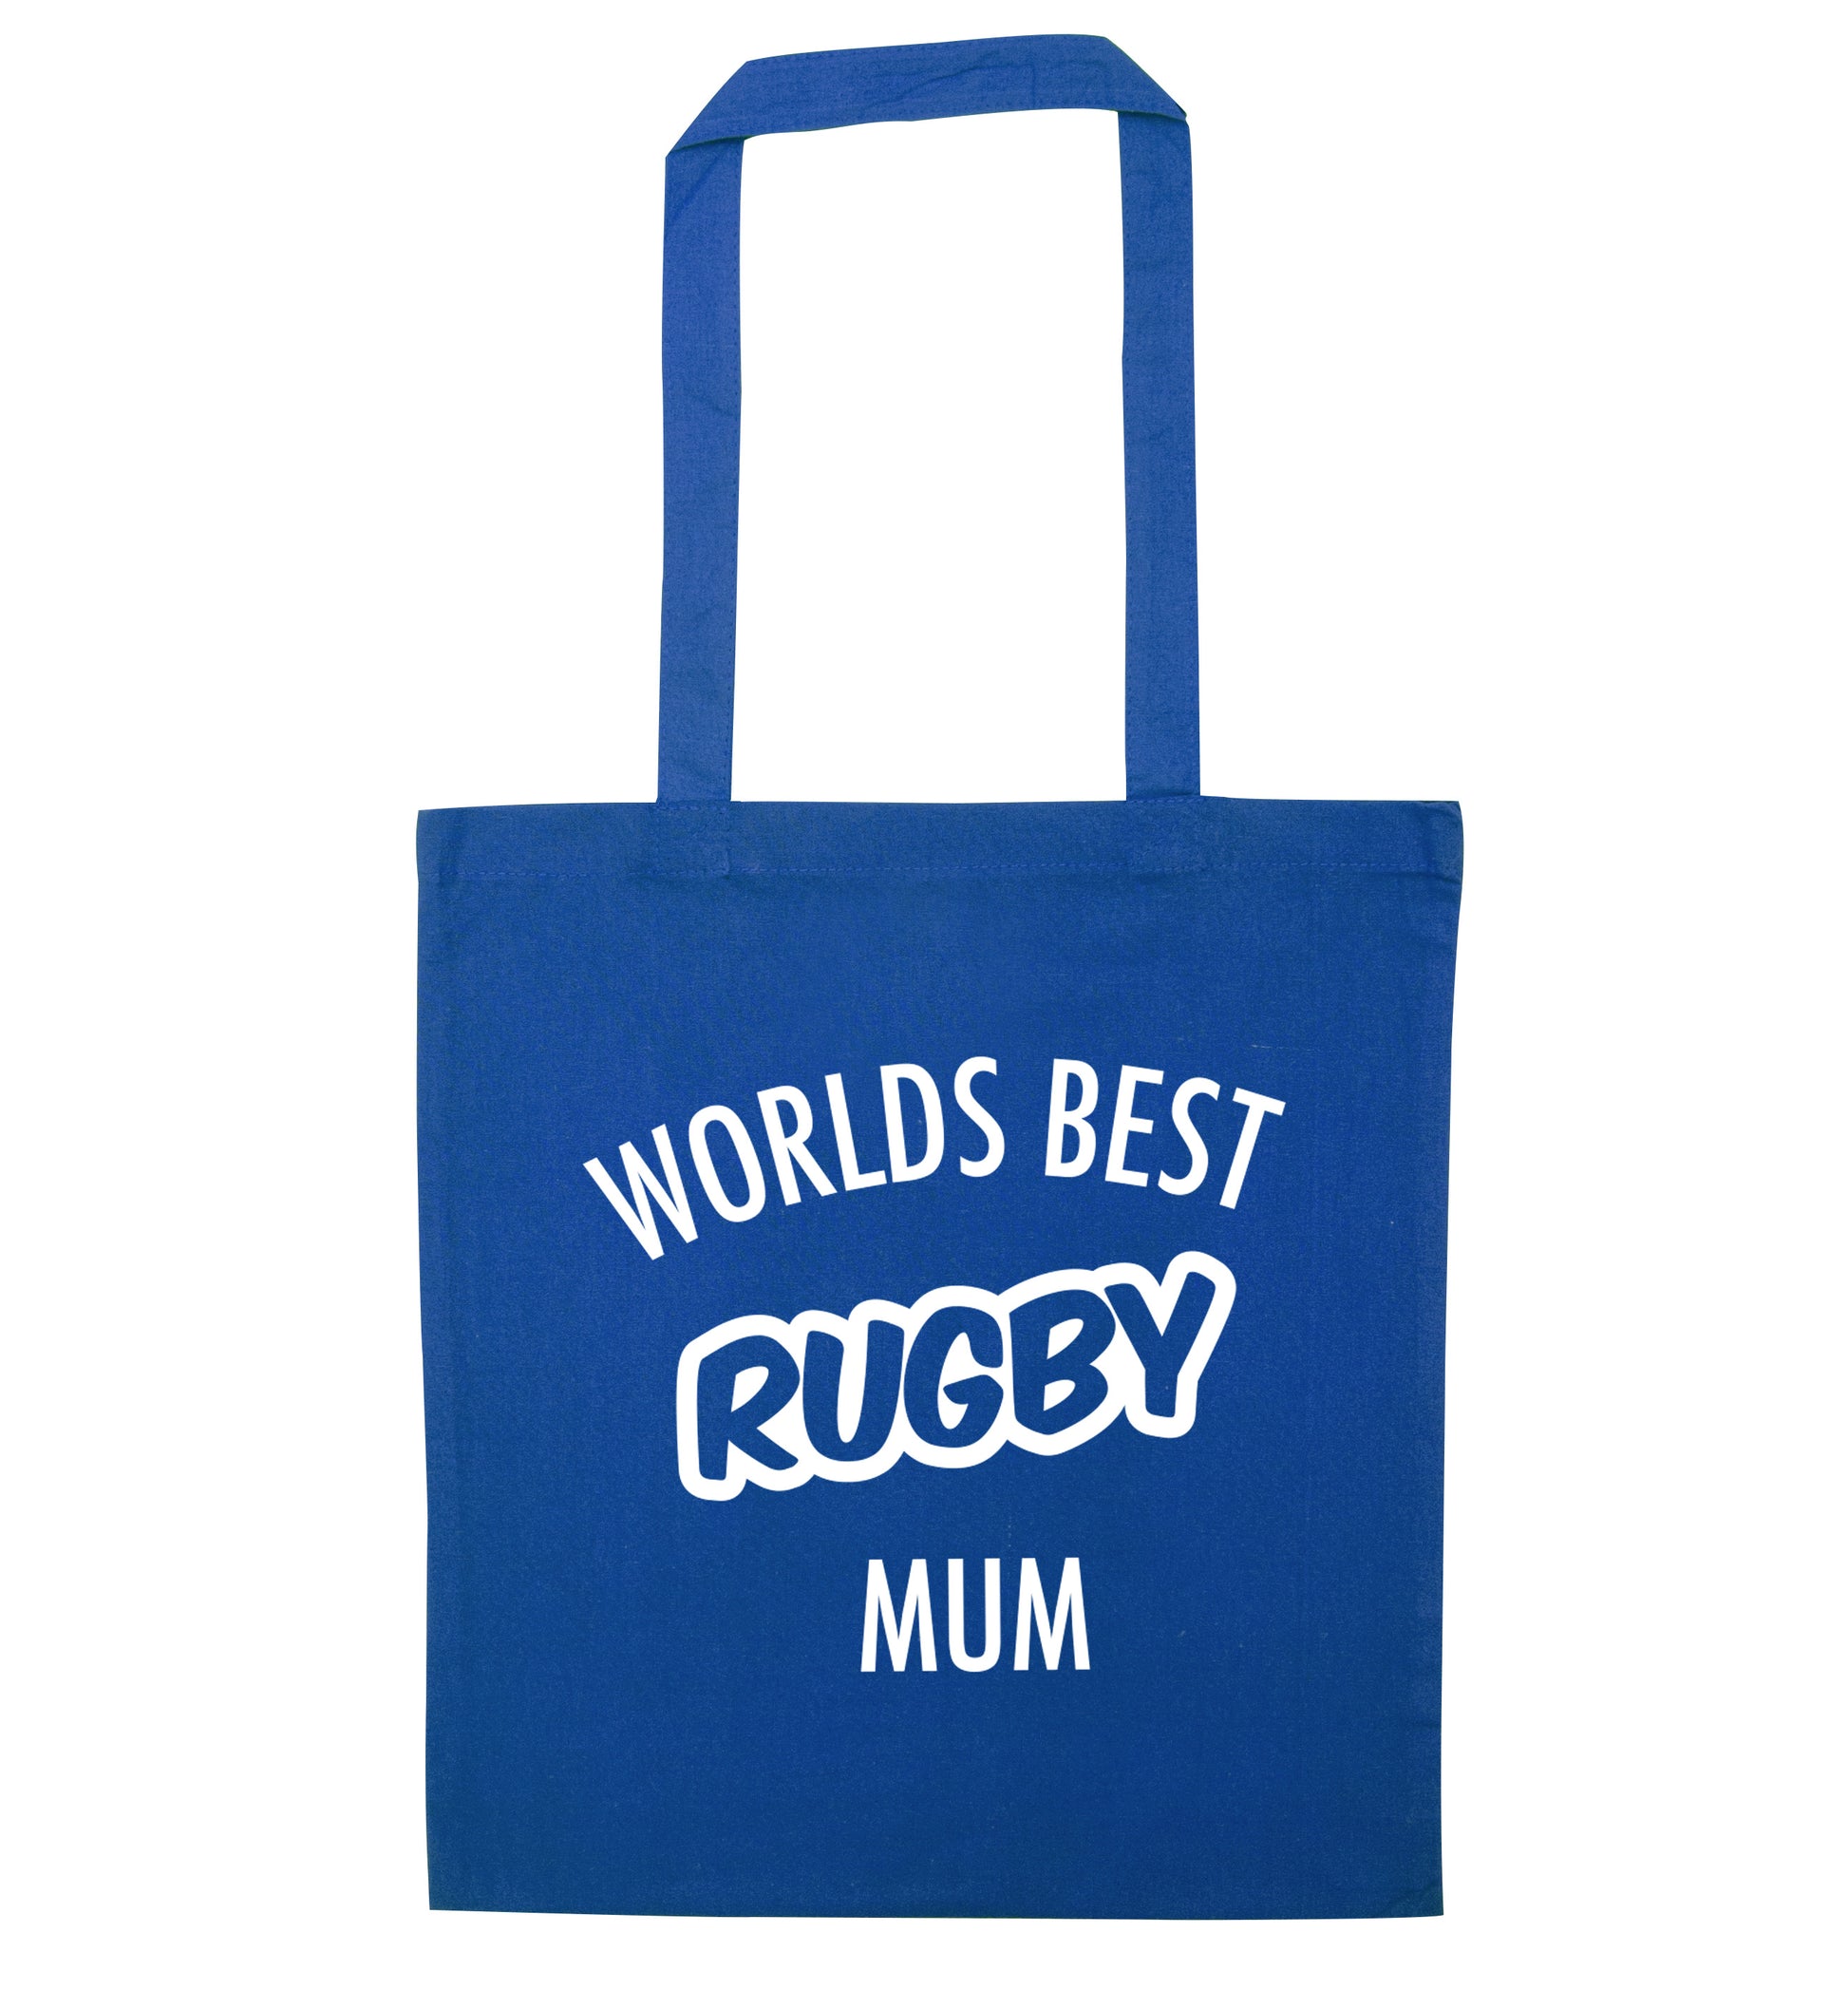 Worlds best rugby mum blue tote bag